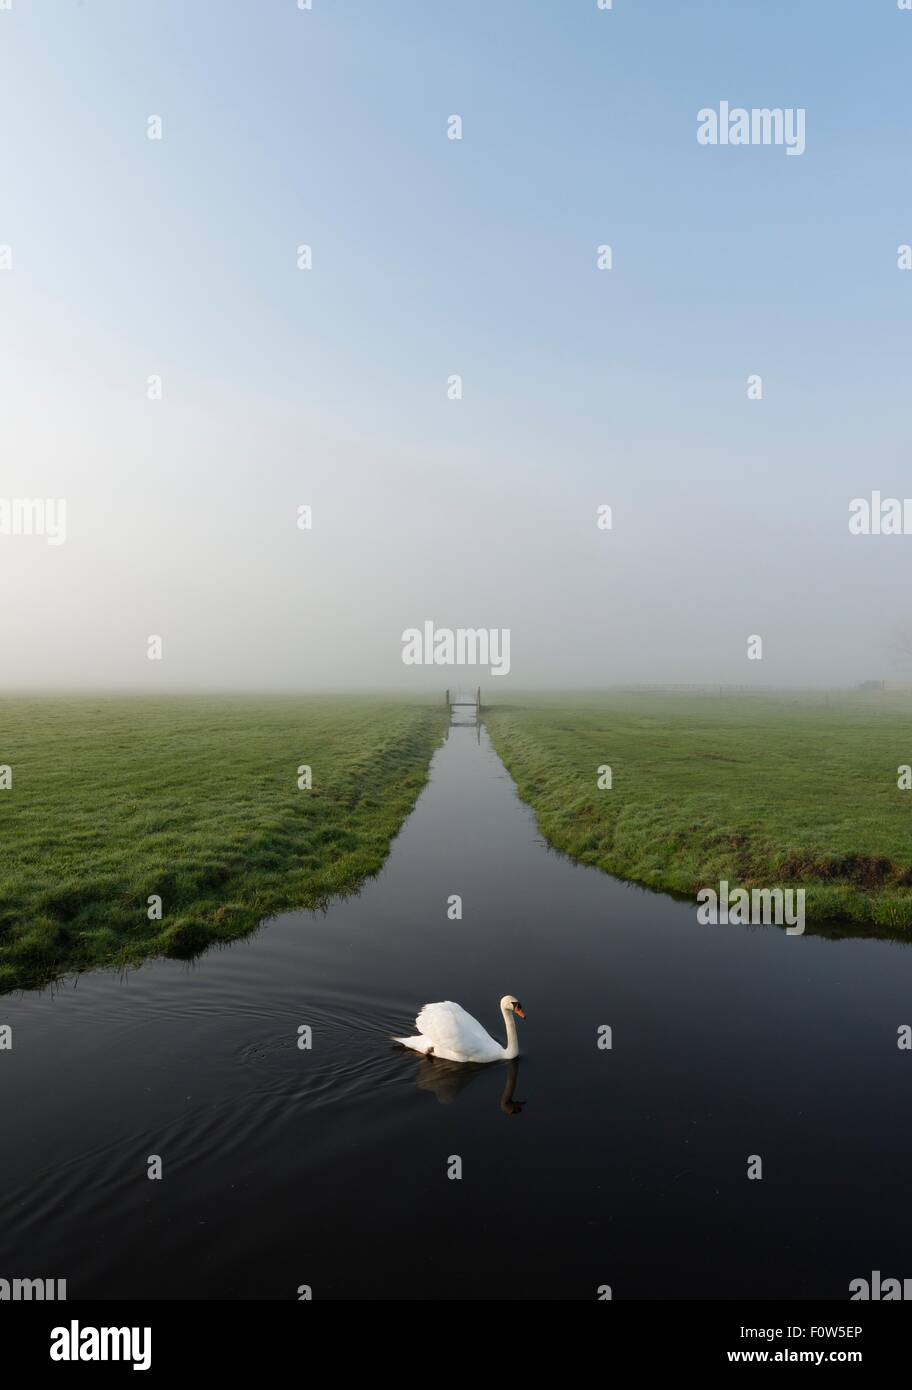 Swan on polder or dyke, Waarder, South Holland, Netherlands Stock Photo